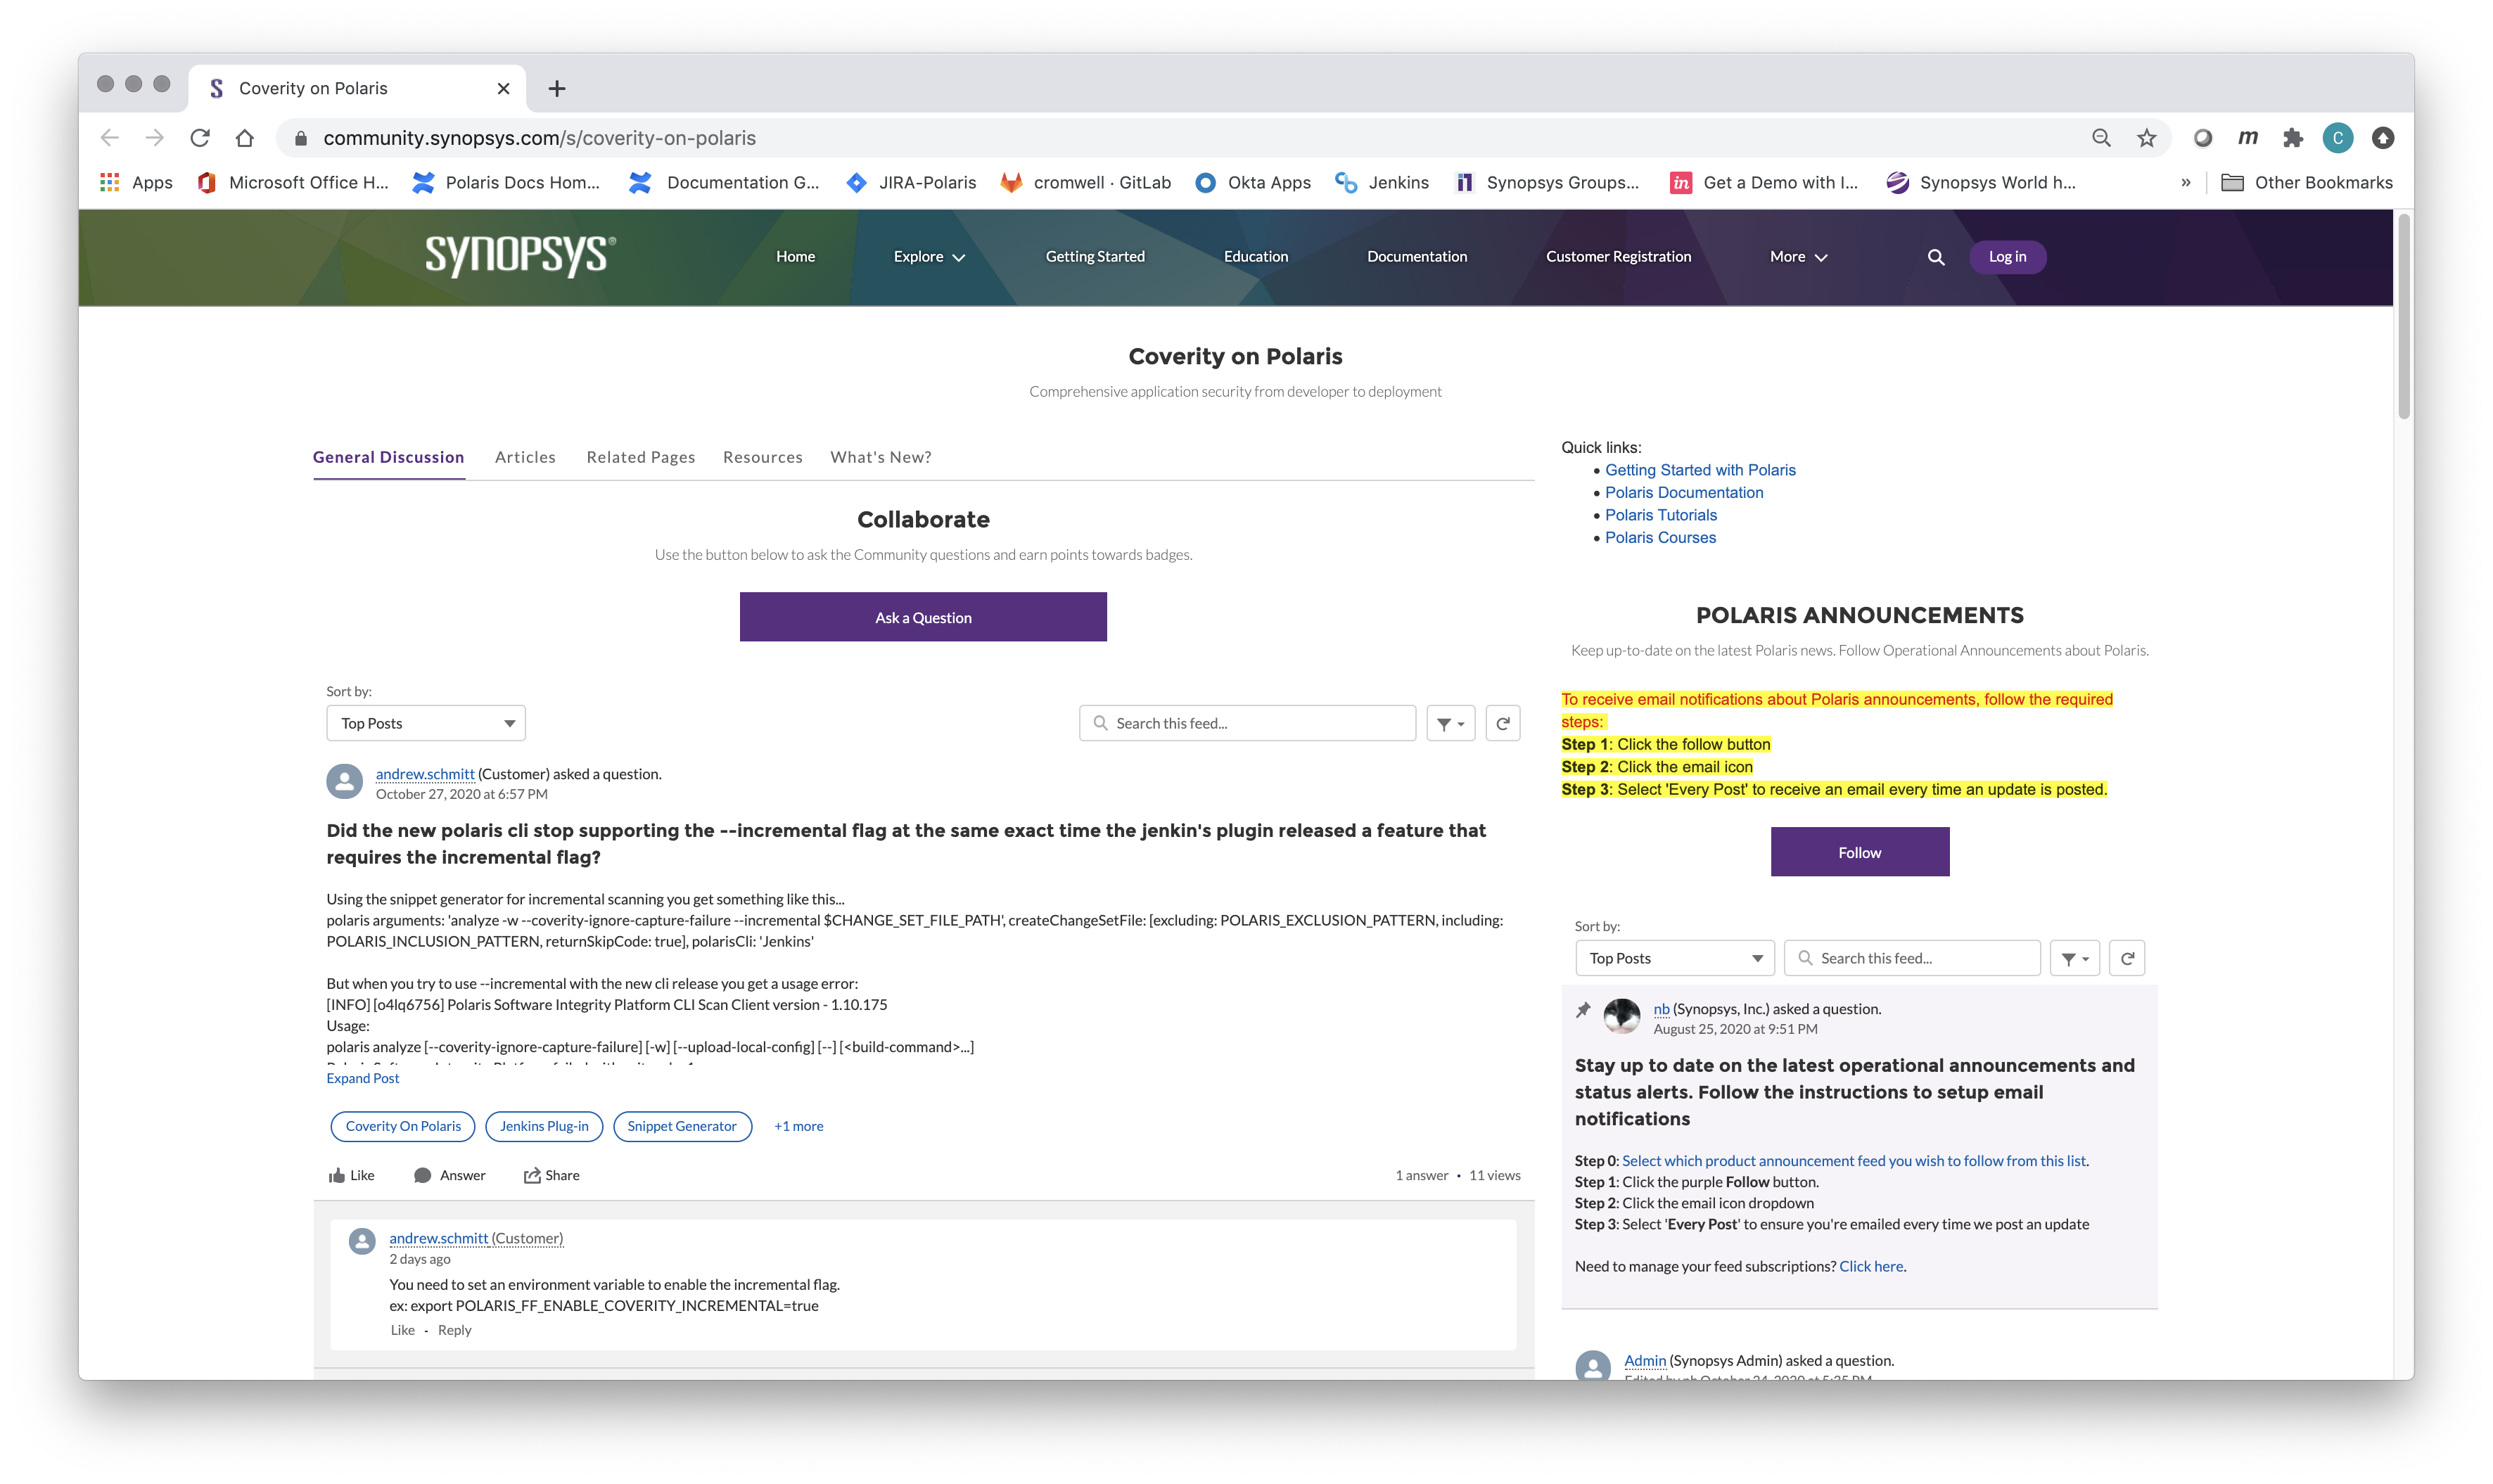 A screenshot of the Coverity on Polaris page, from Synopsys Community.